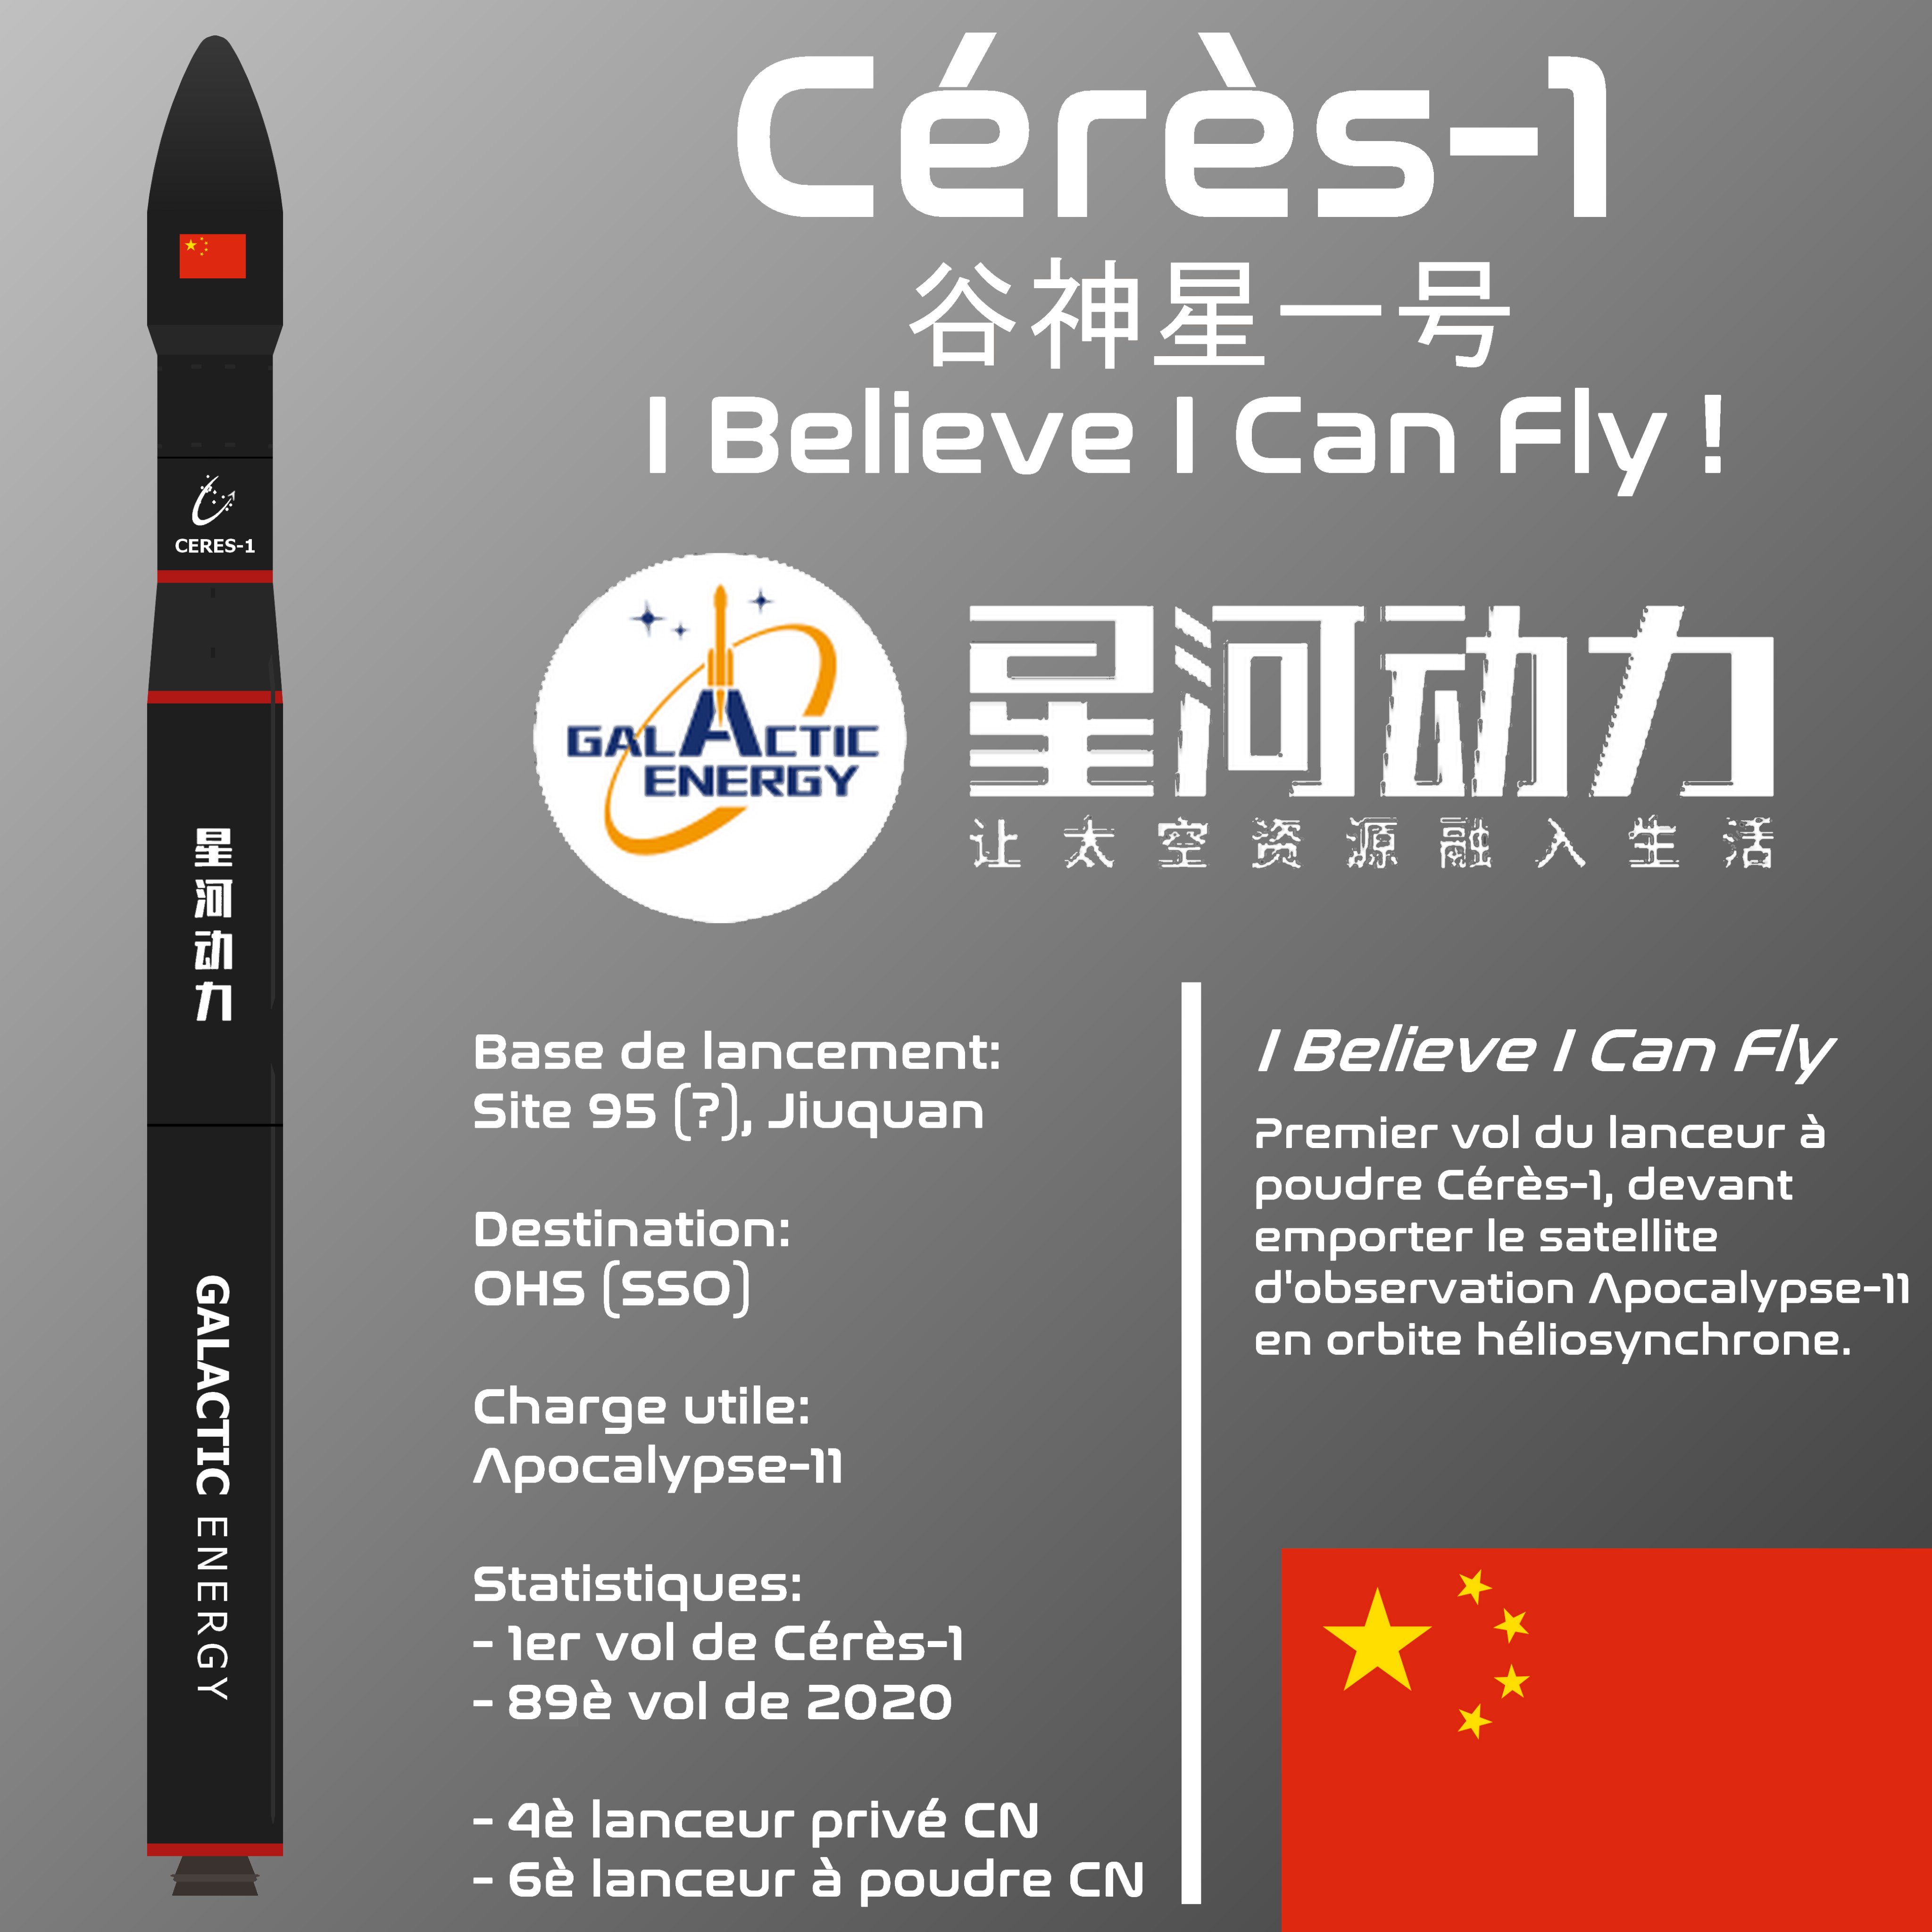 [Chine] CERES-1 "I Believe I Can Fly" (Tianqi-11) - JSLC - 7.11.2020 11540